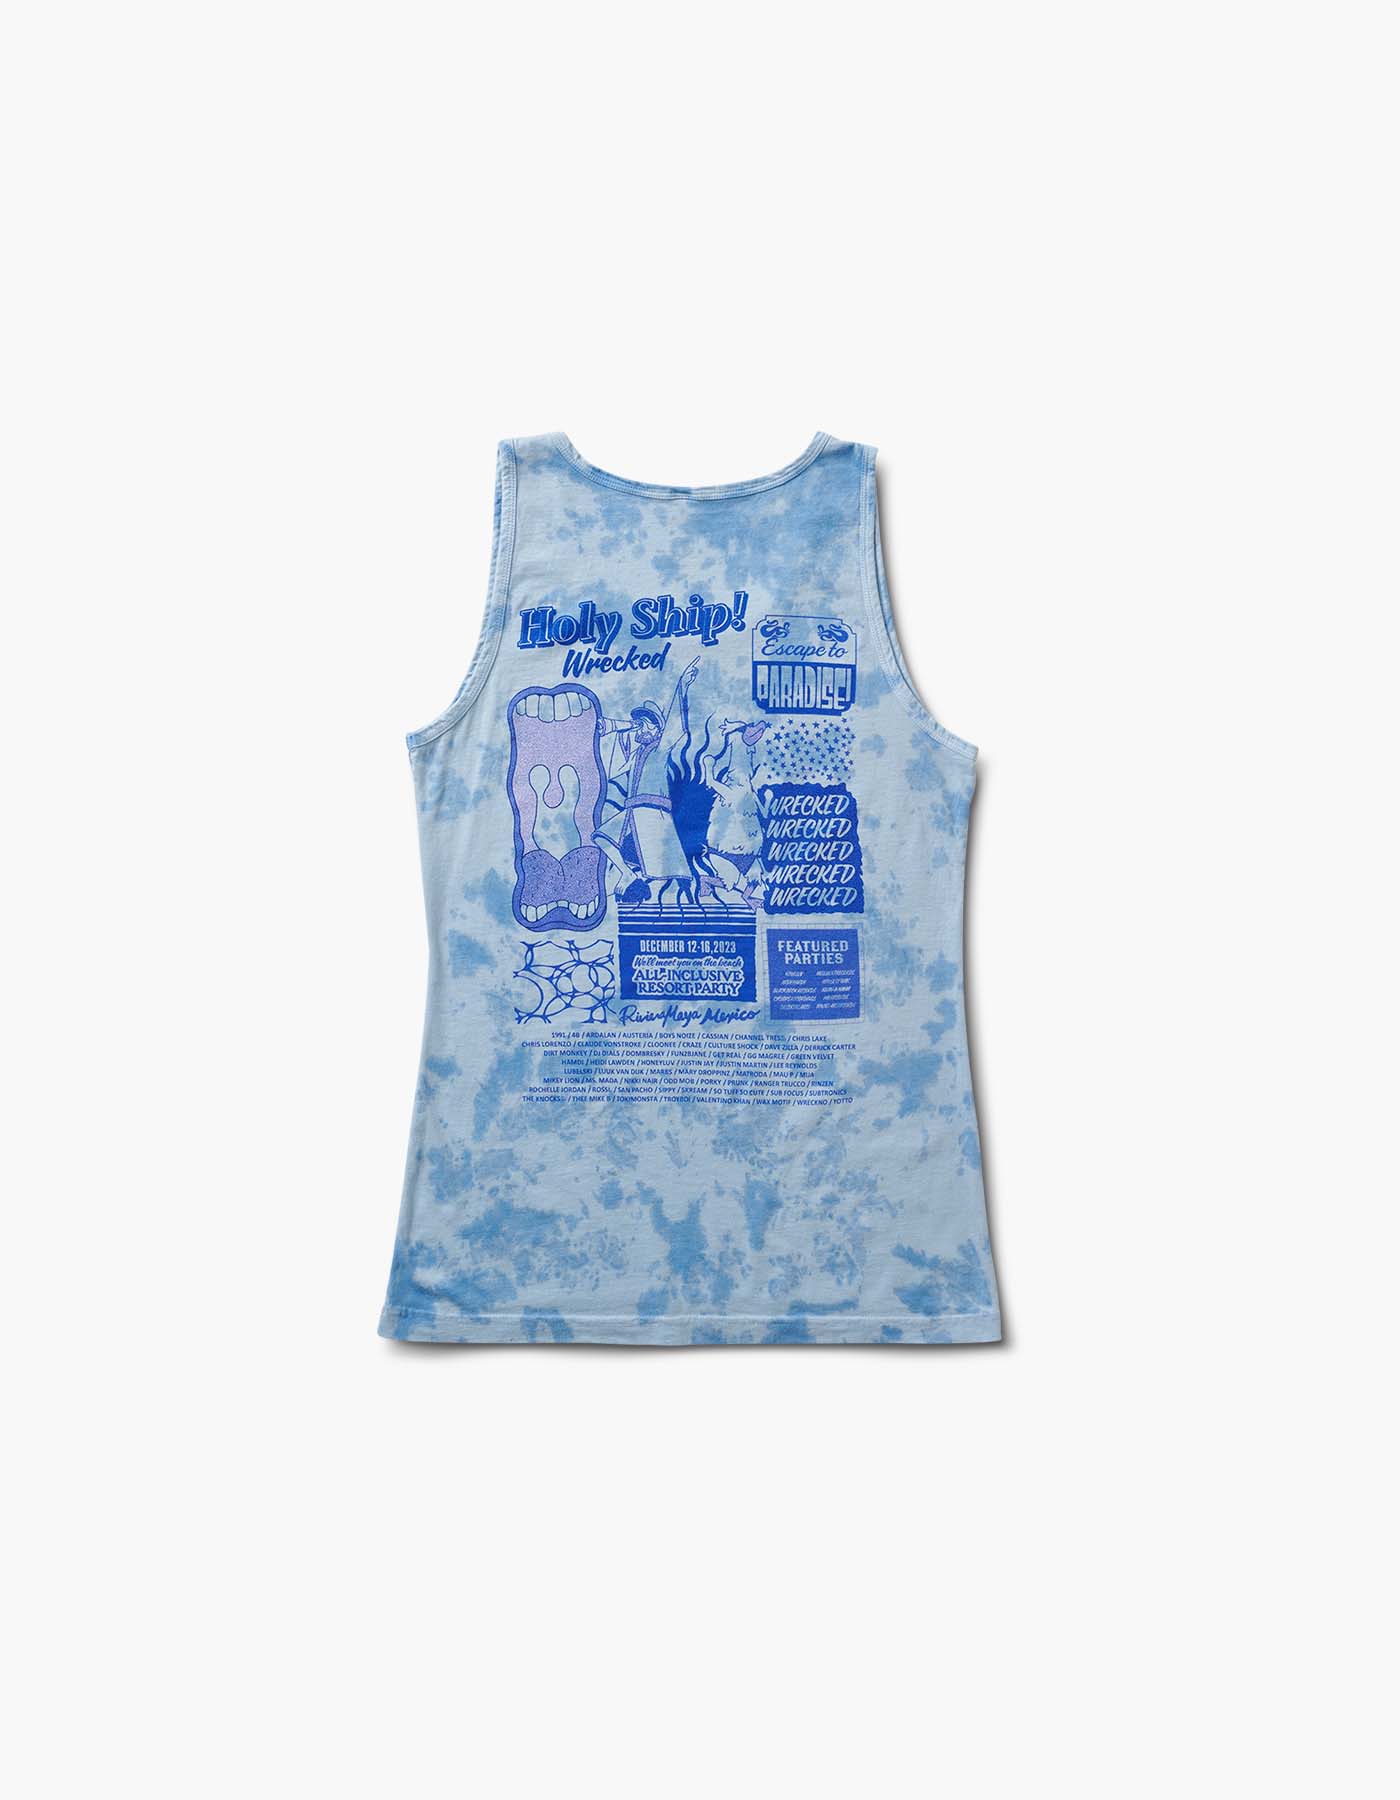 We Are Ready To Ship Lineup Tank